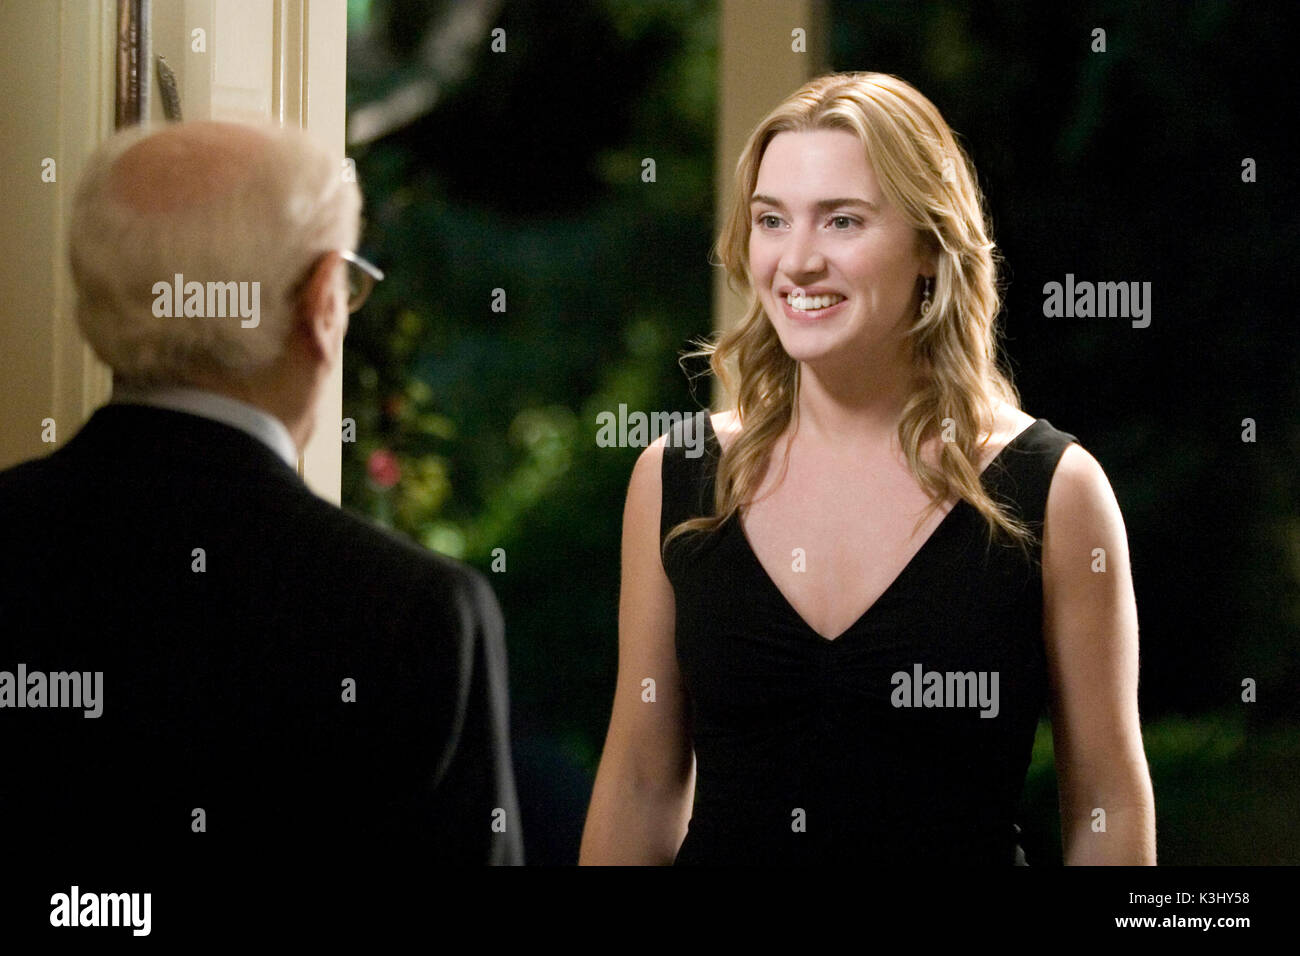 Eli Wallach and Kate Winslet star in Columbia Pictures/Universal Pictures' romantic comedy The Holiday. THE HOLIDAY ELI WALLACH, KATE WINSLET Eli Wallach (left) and Kate Winslet star in Columbia Pictures/Universal Pictures romantic comedy The Holiday.     Date: 2006 Stock Photo